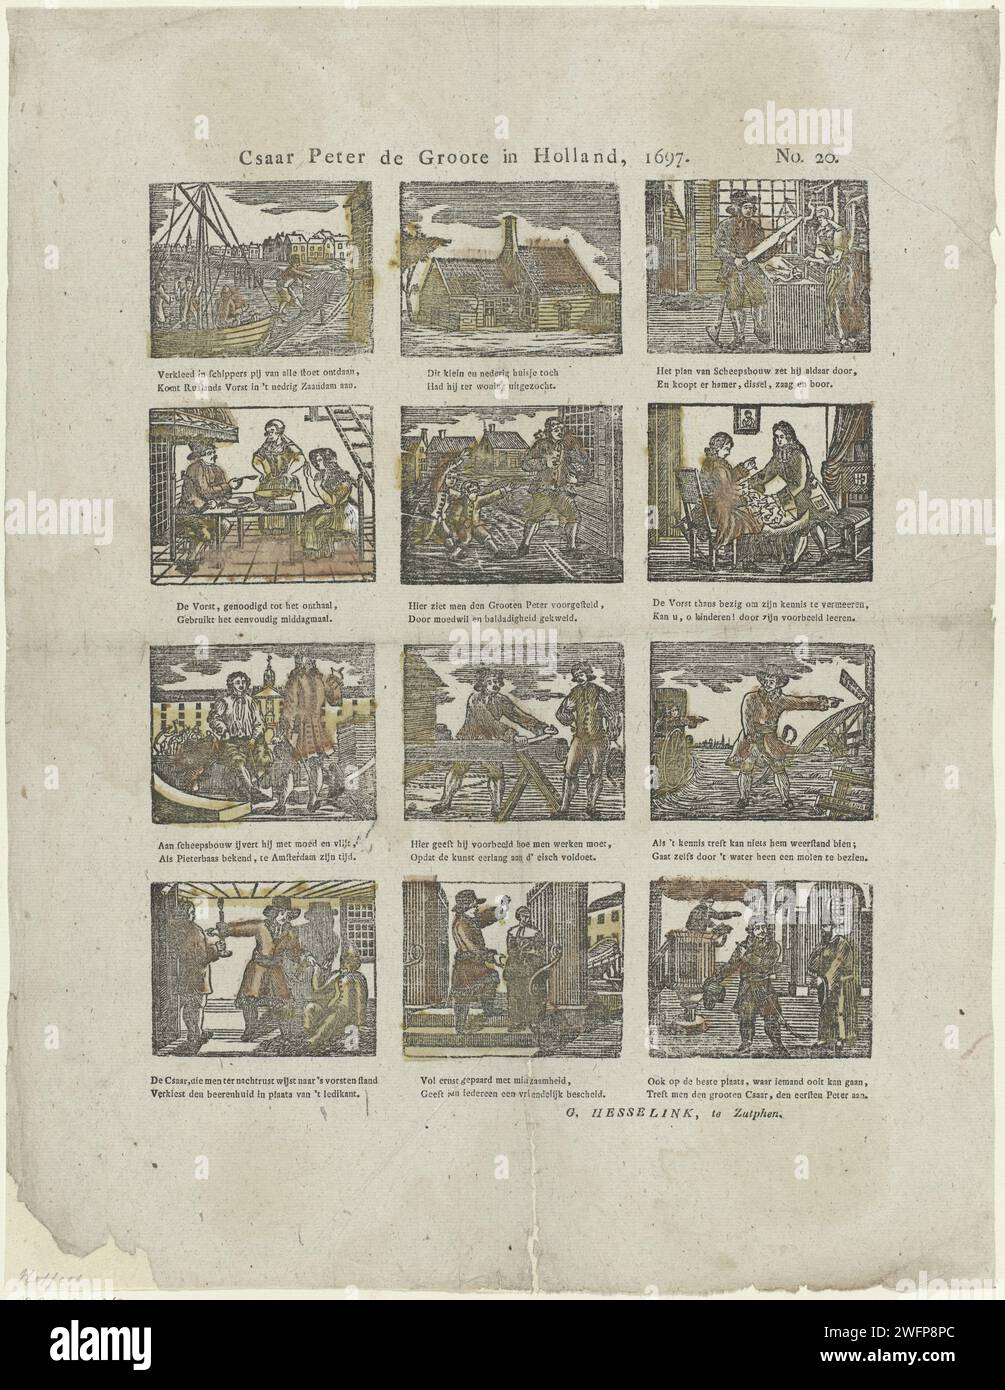 Csaar Peter de Groote in Holland, 1697, Christiaan Jacob Schuyling, 1820 - 1838 print Leaf with 12 performances from the life of Peter I the Great, Tsar of Russia, during his stay in Zaandam and Amsterdam. A caption under each image. Numbered at the top right: No. 20. print maker: RotterdamZutphenpublisher: Rotterdam paper letterpress printing shipyard-workers. emperor Zaandam. Amsterdam Stock Photo